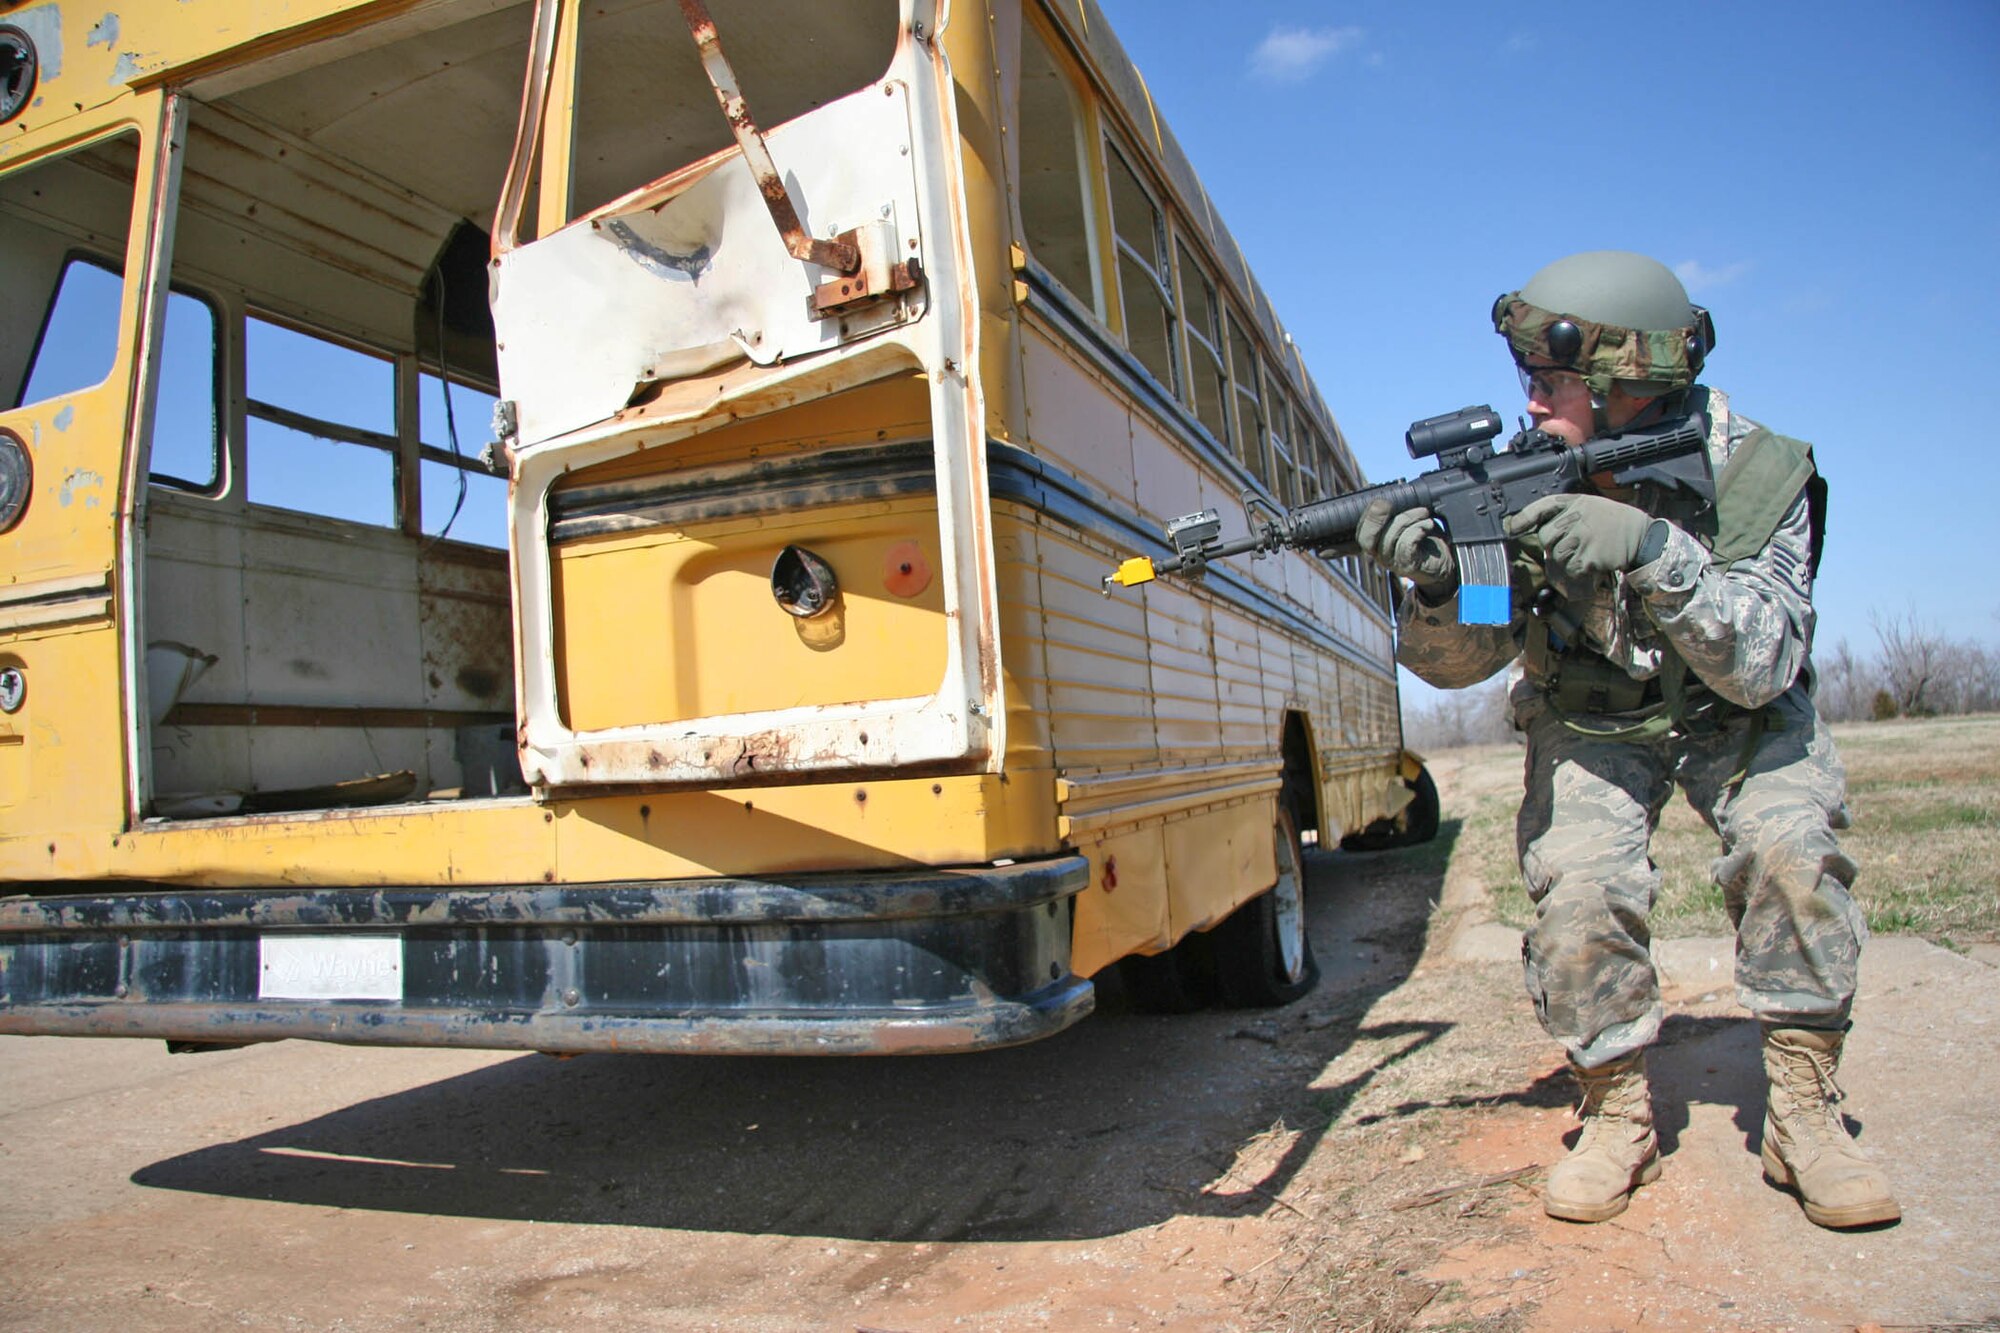 Staff Sgt. Jarod Williams with the 3rd Combat Communications Group peers around a school bus used for cover from enemy fire during a combat training exercise at Tinker’s Glenwood Training Area March 17. Airmen from the 3rd Herd, and four other communications groups from Air Force Space Command, will participate in a combat competition here April 16-19.